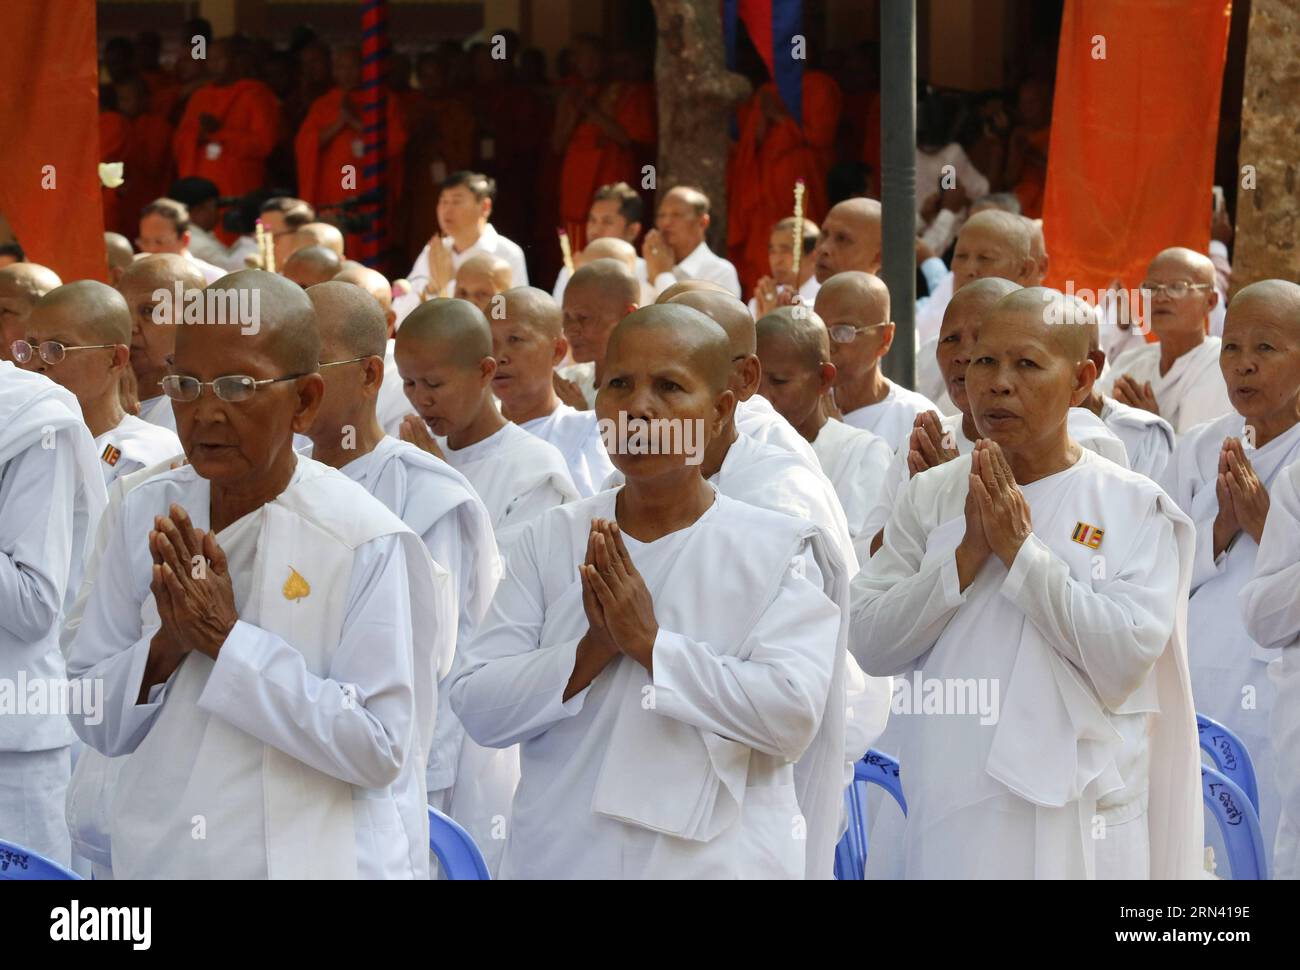 KULTUR Buddhisten feiern Vesakhfest (150502) -- KANDAL, May 2, 2015 -- Cambodian Buddhist nuns pray on the Visak Bochea Day in Kandal province, Cambodia, May 2, 2015. Cambodia on Saturday marked the Visak Bochea Day, which was held to commemorate the anniversary of the Lord Buddha s birth, enlightenment and death. )(azp) CAMBODIA-KANDAL-VISAK BOCHEA DAY Sovannara PUBLICATIONxNOTxINxCHN   Culture Buddhists celebrate   Kandal May 2 2015 Cambodian Buddhist Nuns Pray ON The  Bochea Day in Kandal Province Cambodia May 2 2015 Cambodia ON Saturday marked The  Bochea Day Which what Hero to commemorate Stock Photo